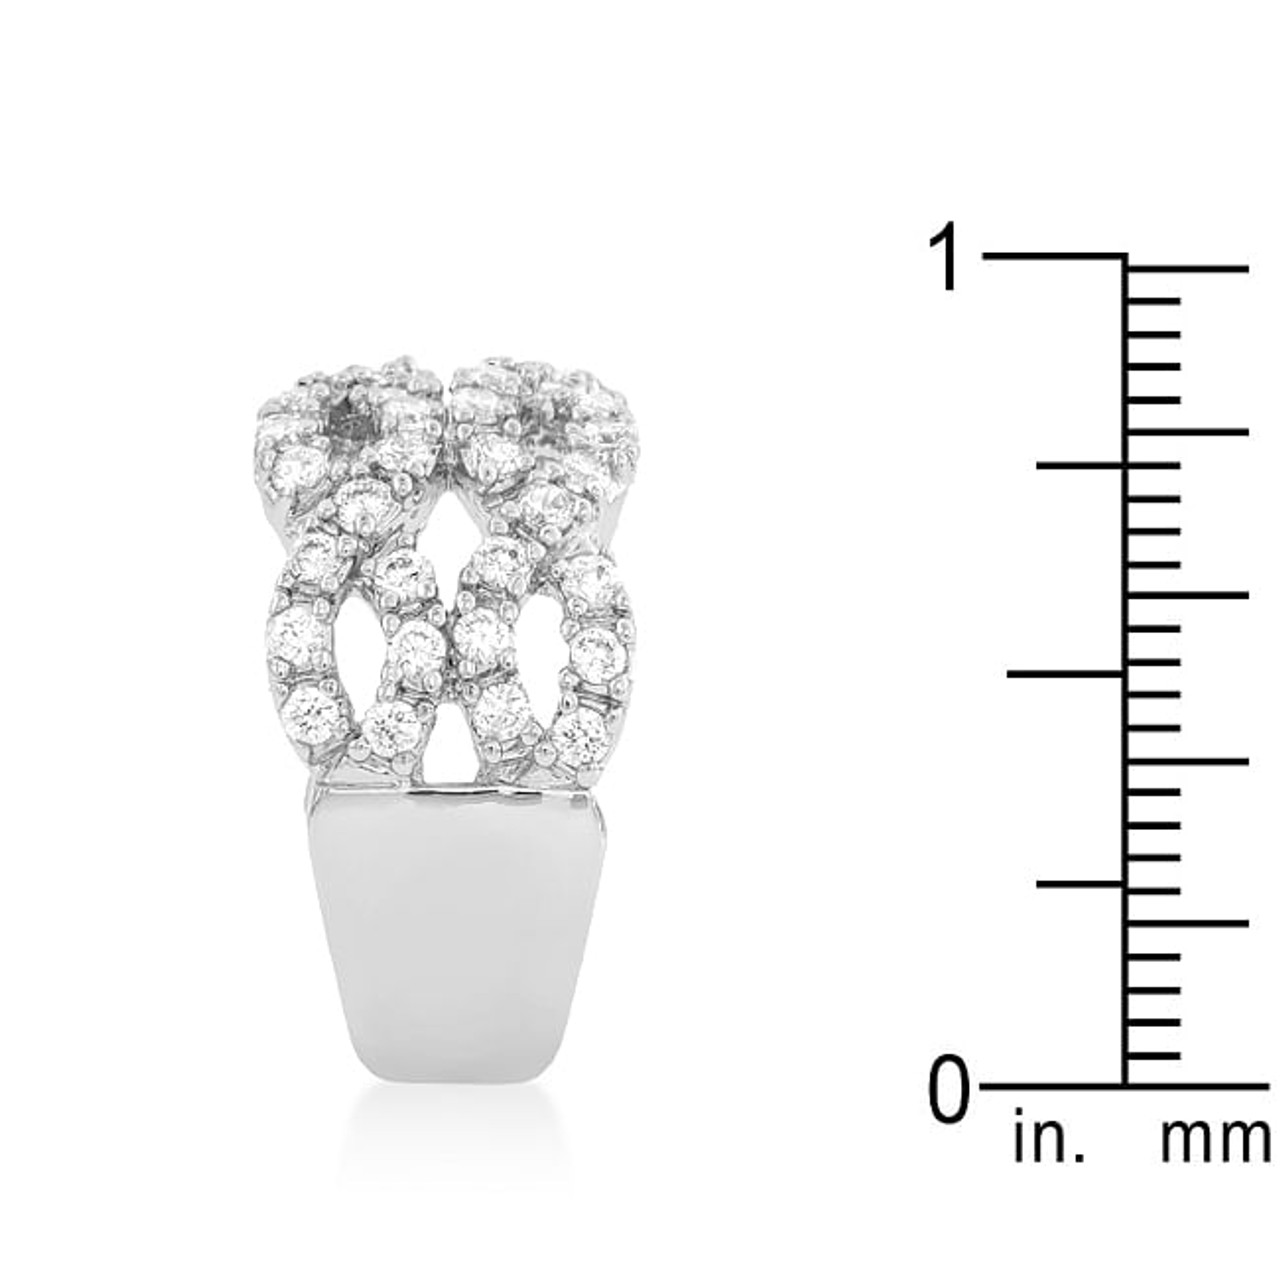 Braided CZ Cocktail Ring